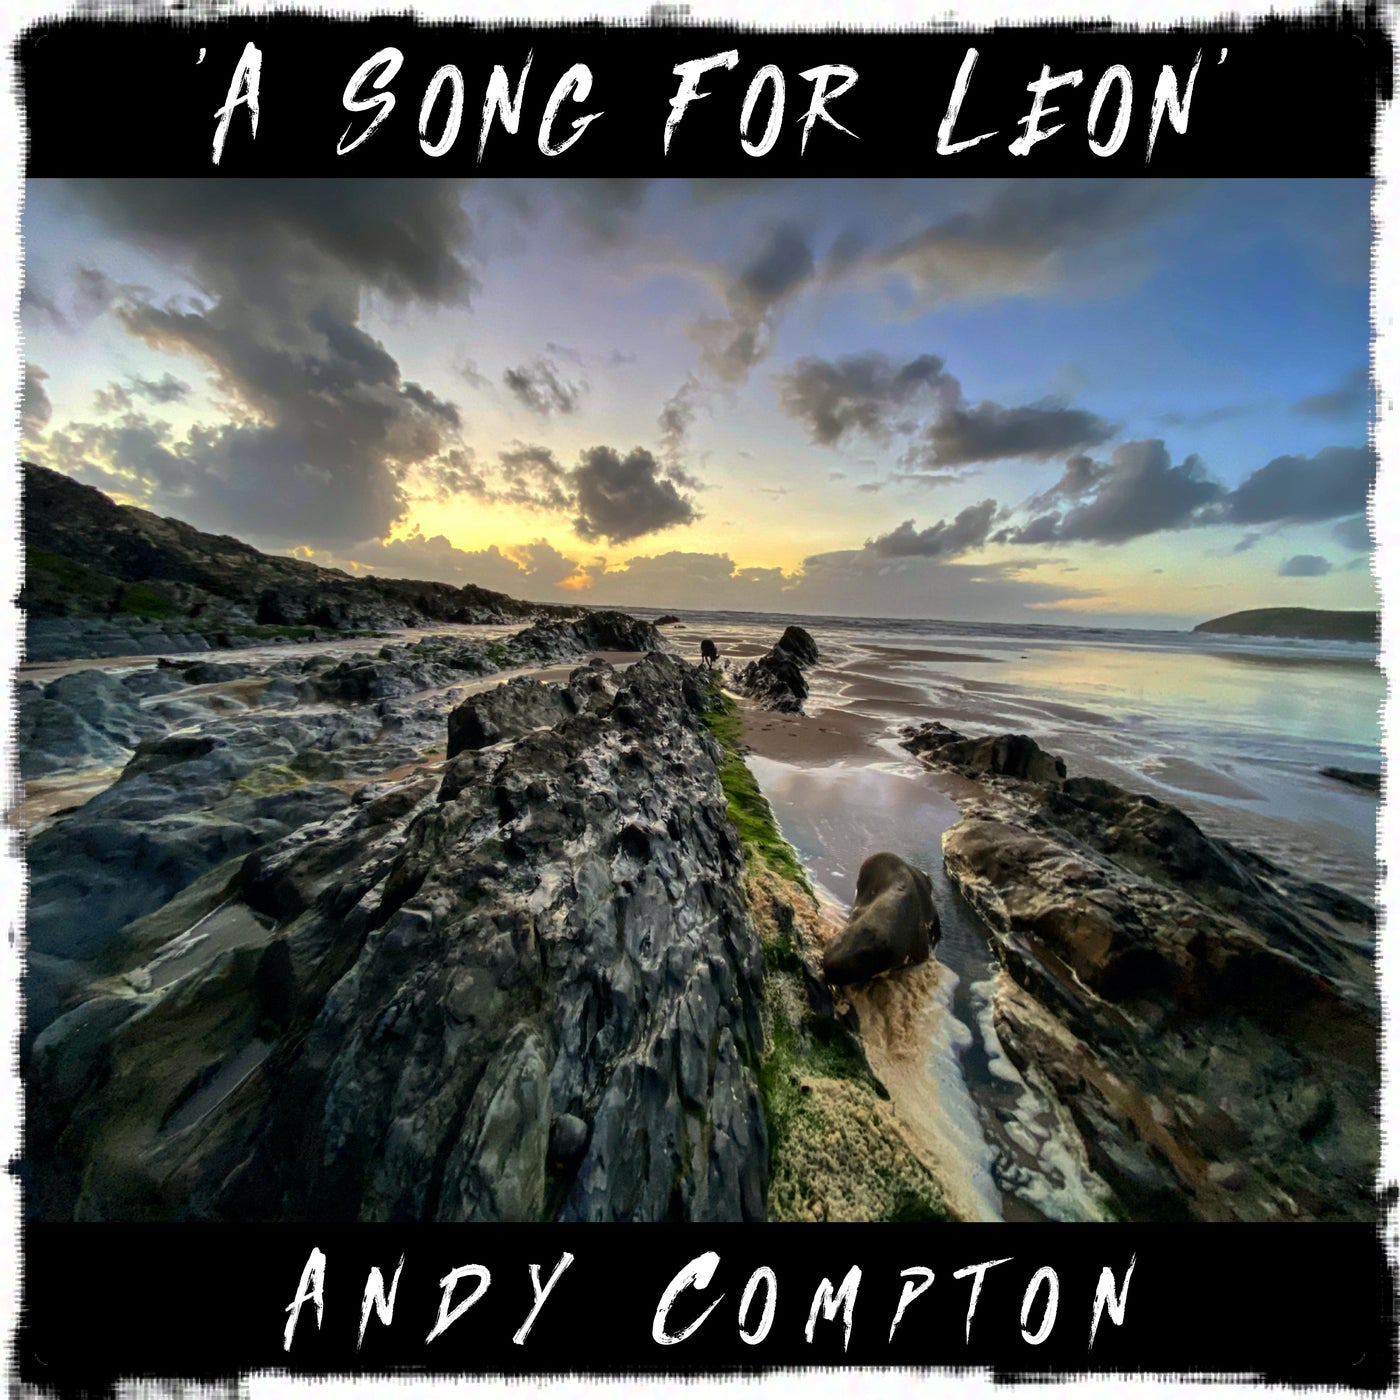 A Song for Leon